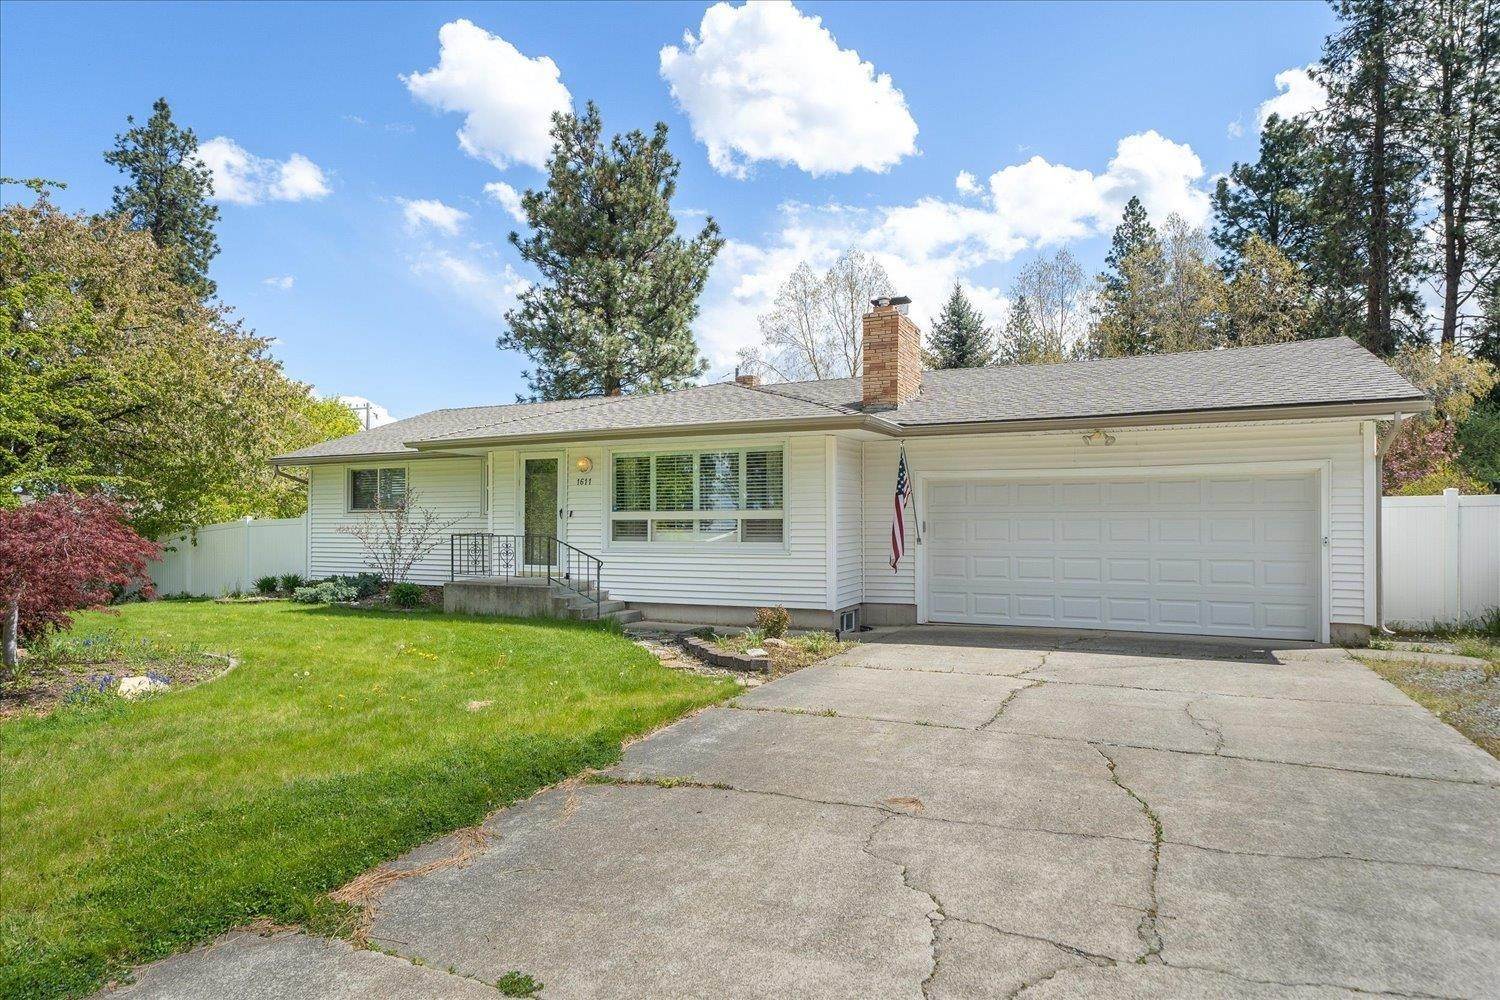 2. Single Family Homes for Sale at 1611 S Woodlawn Road Spokane Valley, Washington 99216 United States